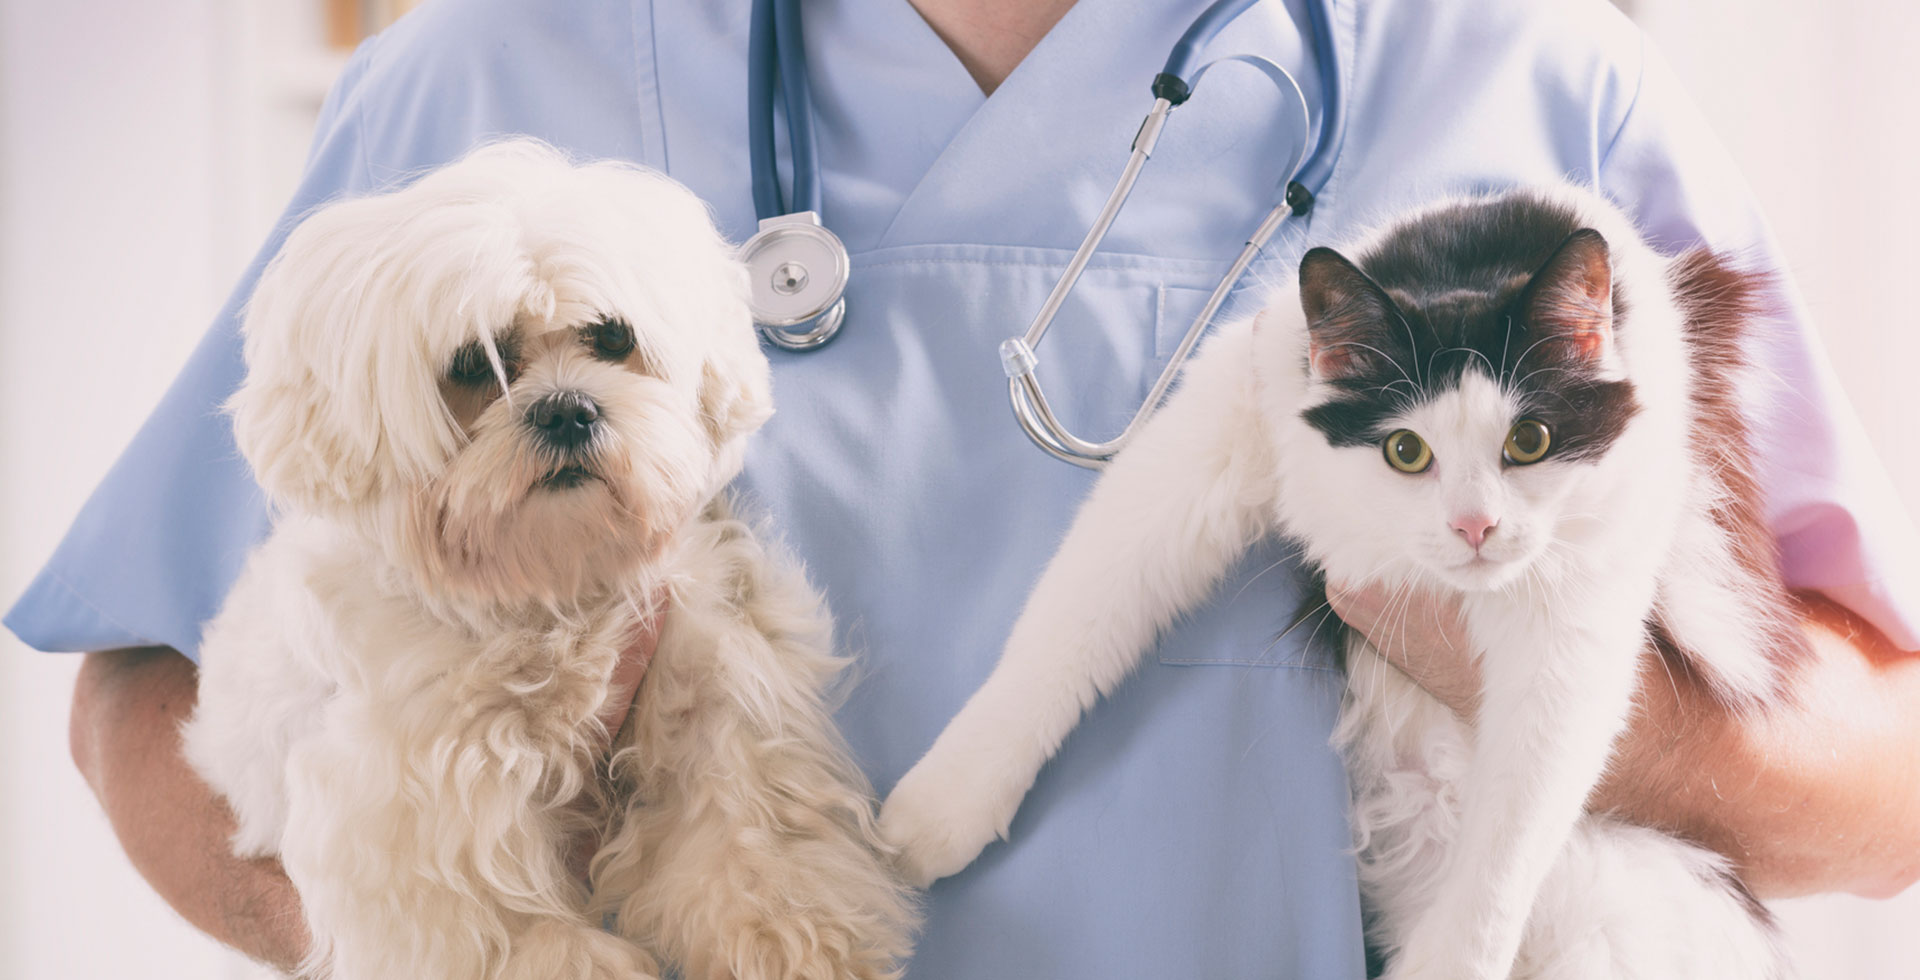 Pet Healthcare: Cat and dog at vet